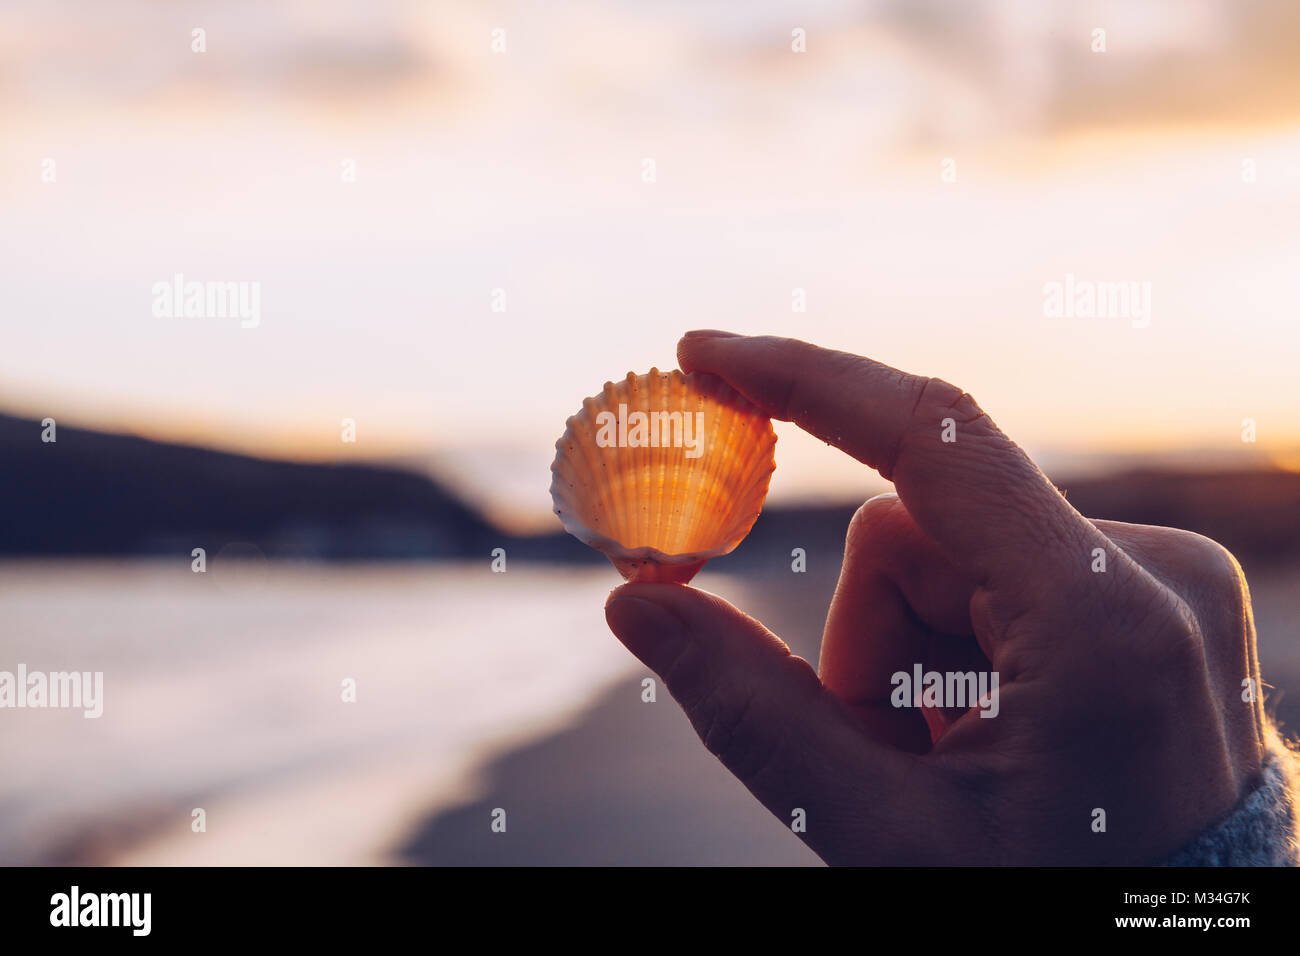 Close up of a hand holding a shell on the beach at sunset - winter season - story telling sequence. Stock Photo